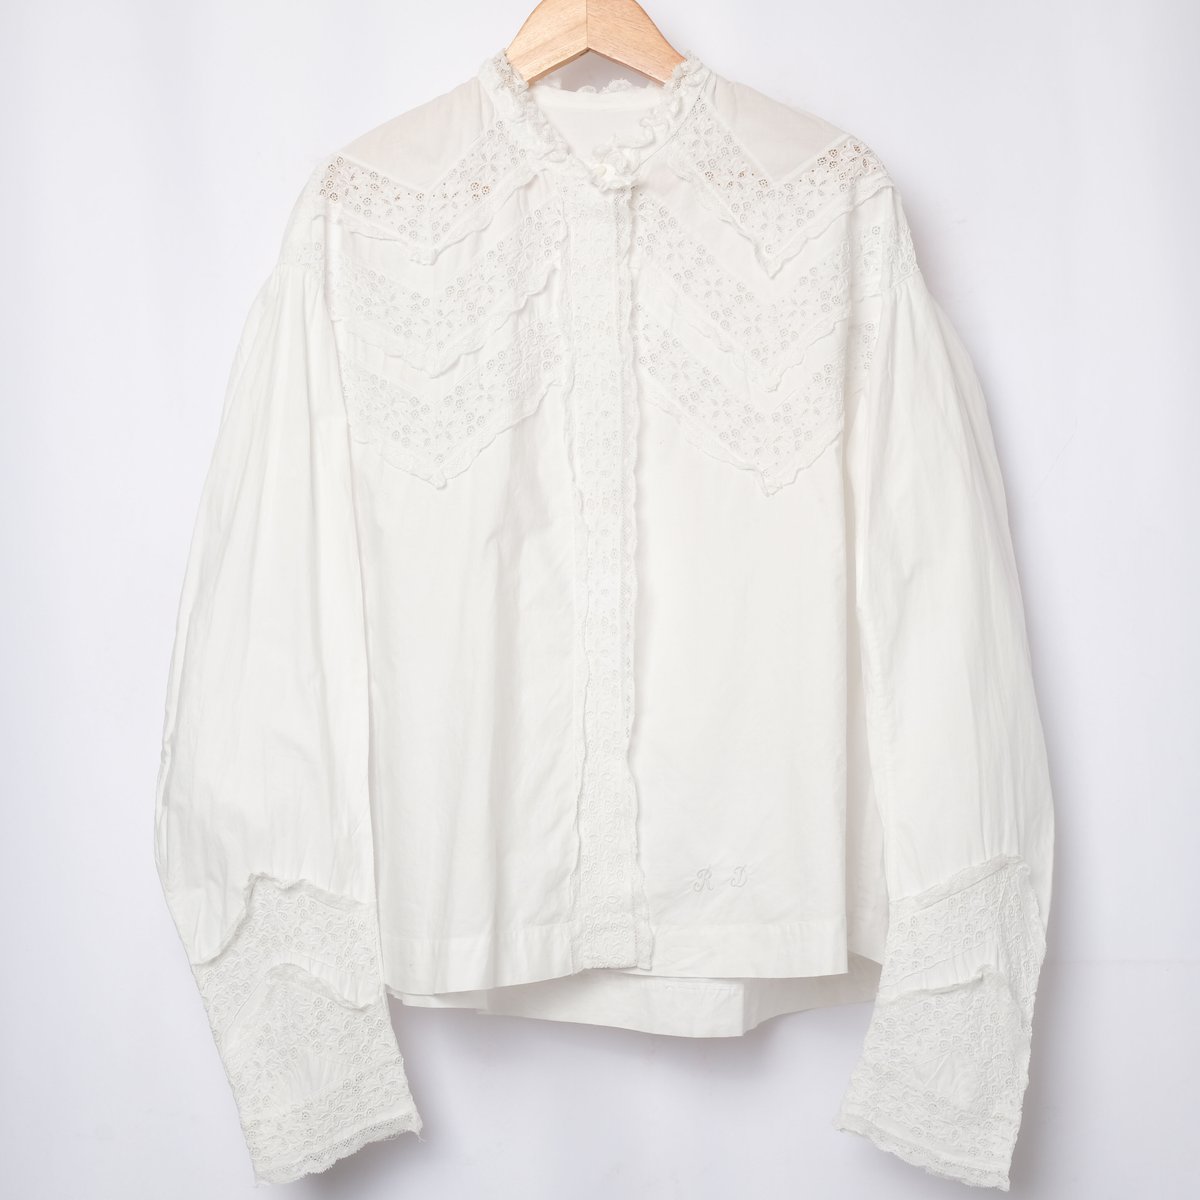 Early 1900s France Antique Cotton Blouse 3 | Ug...